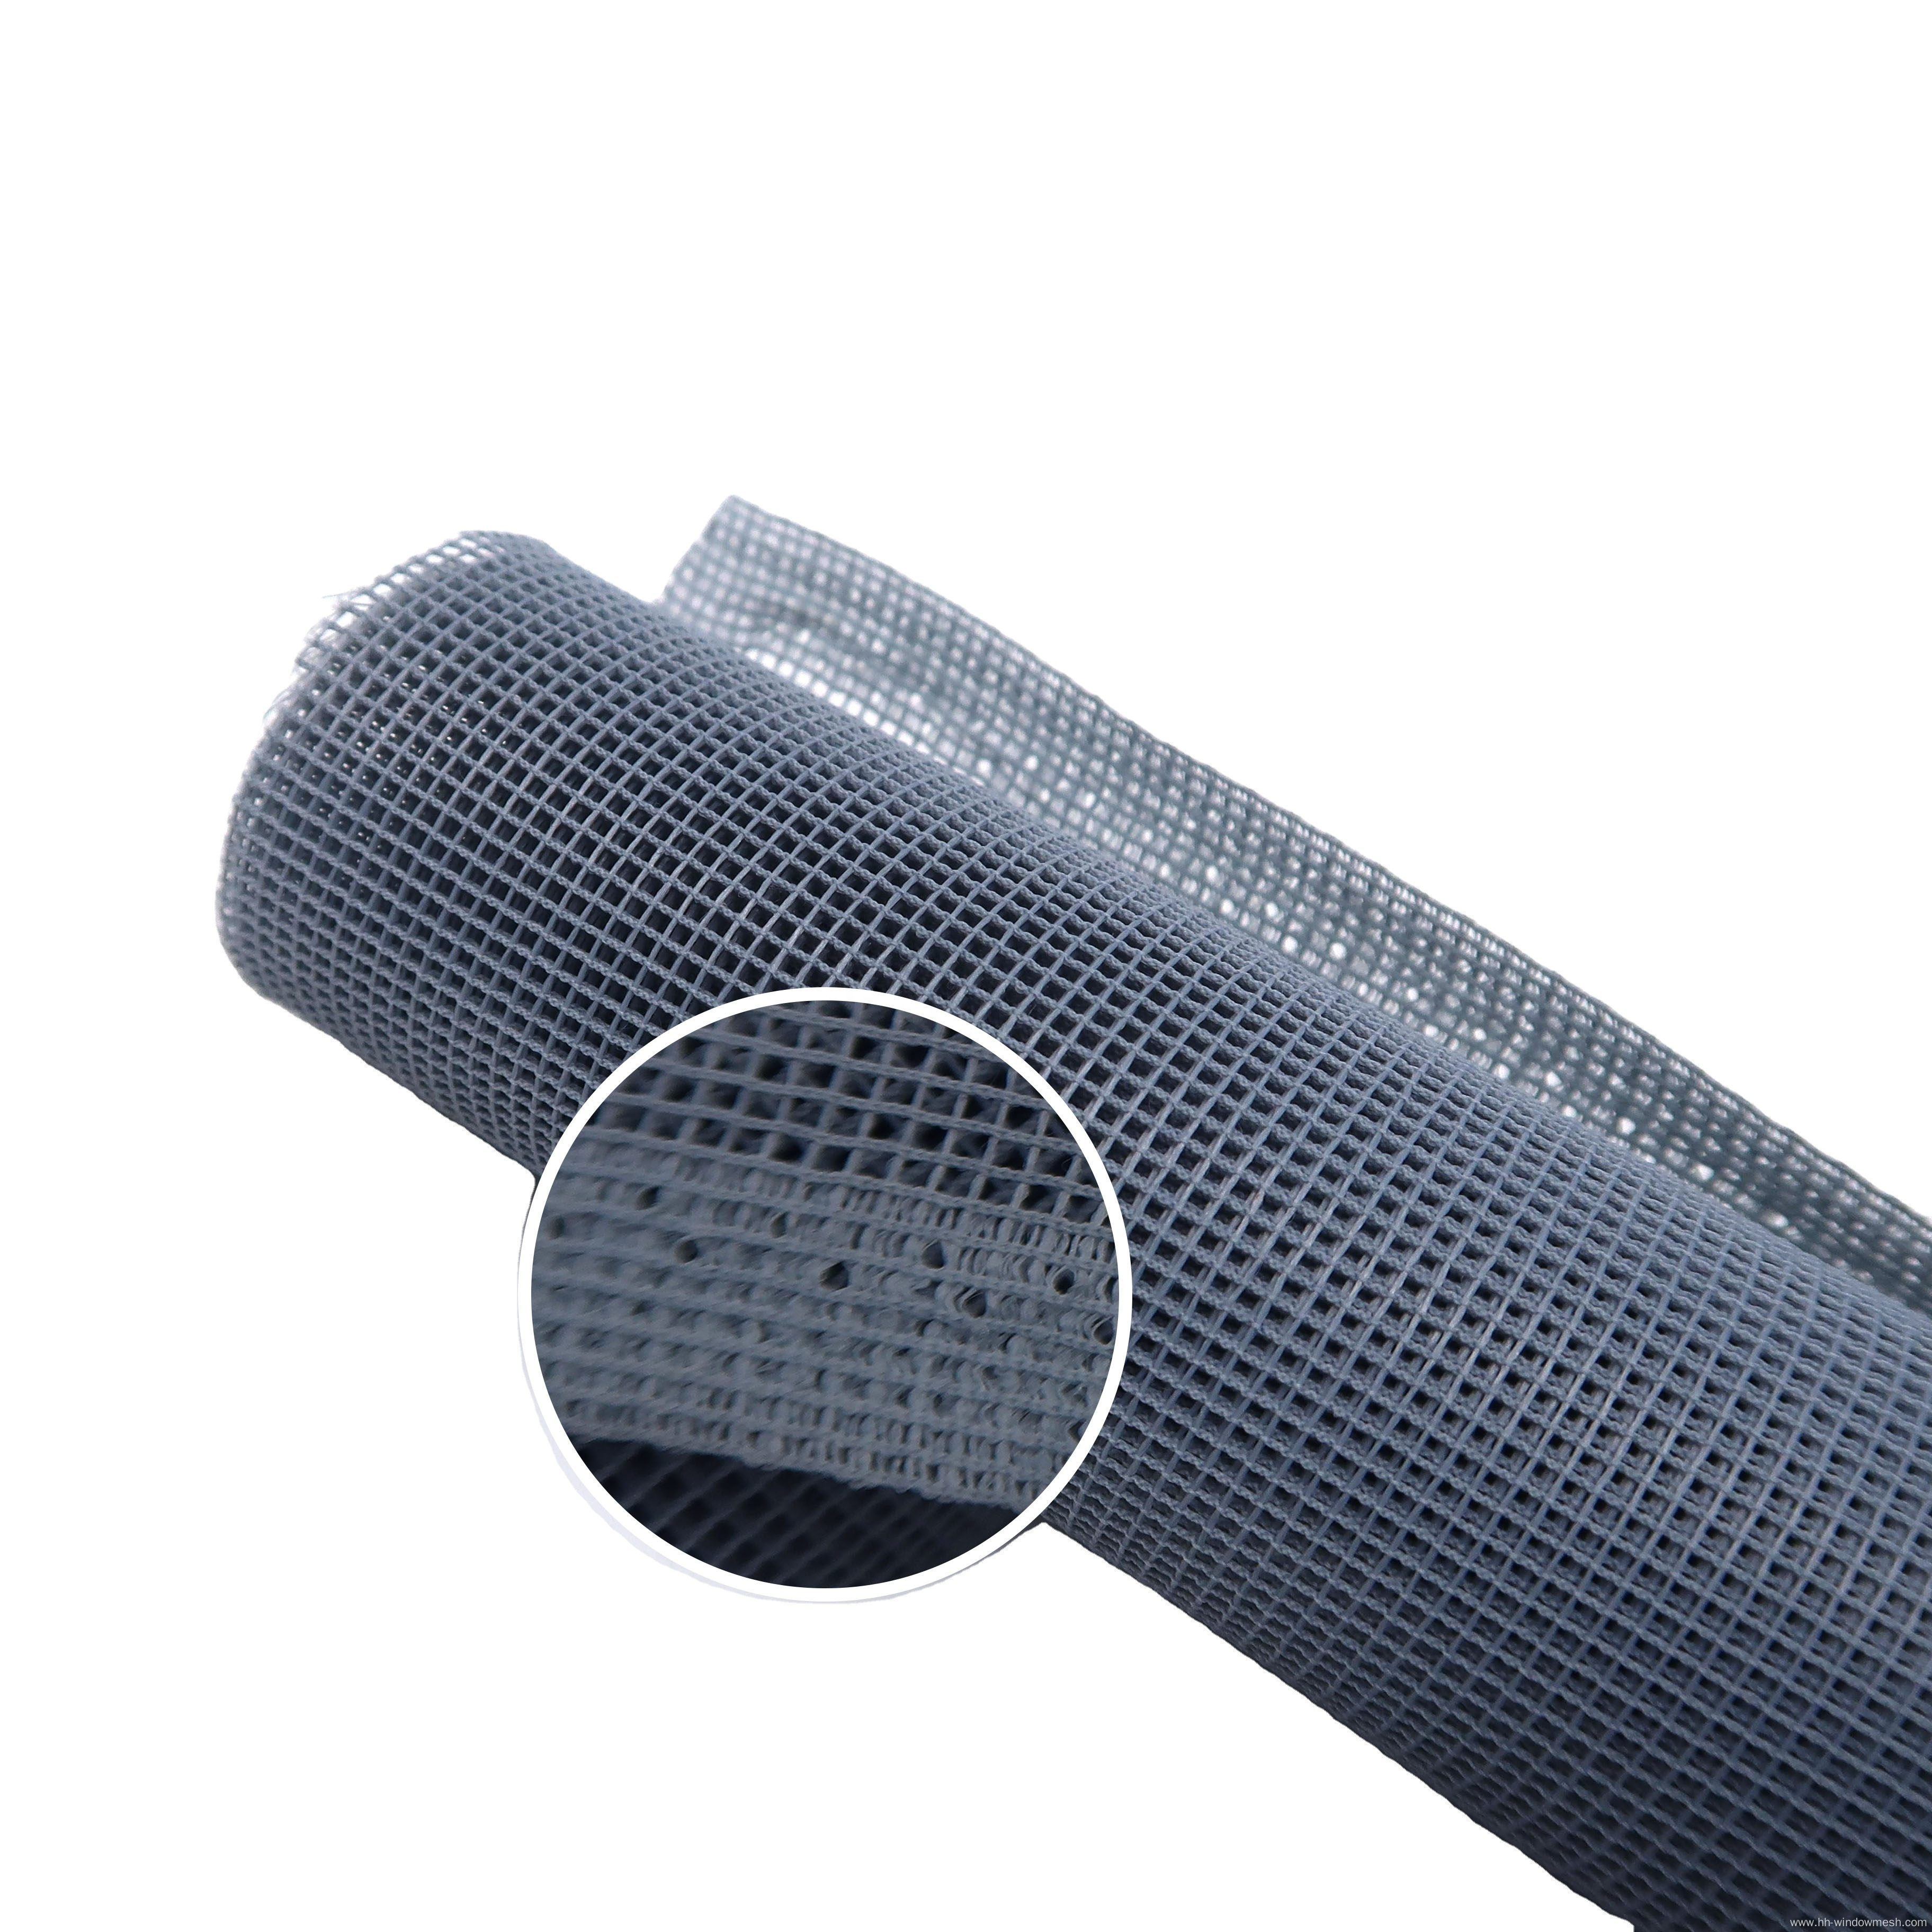 Polyester insect mosquito screen mesh fly net